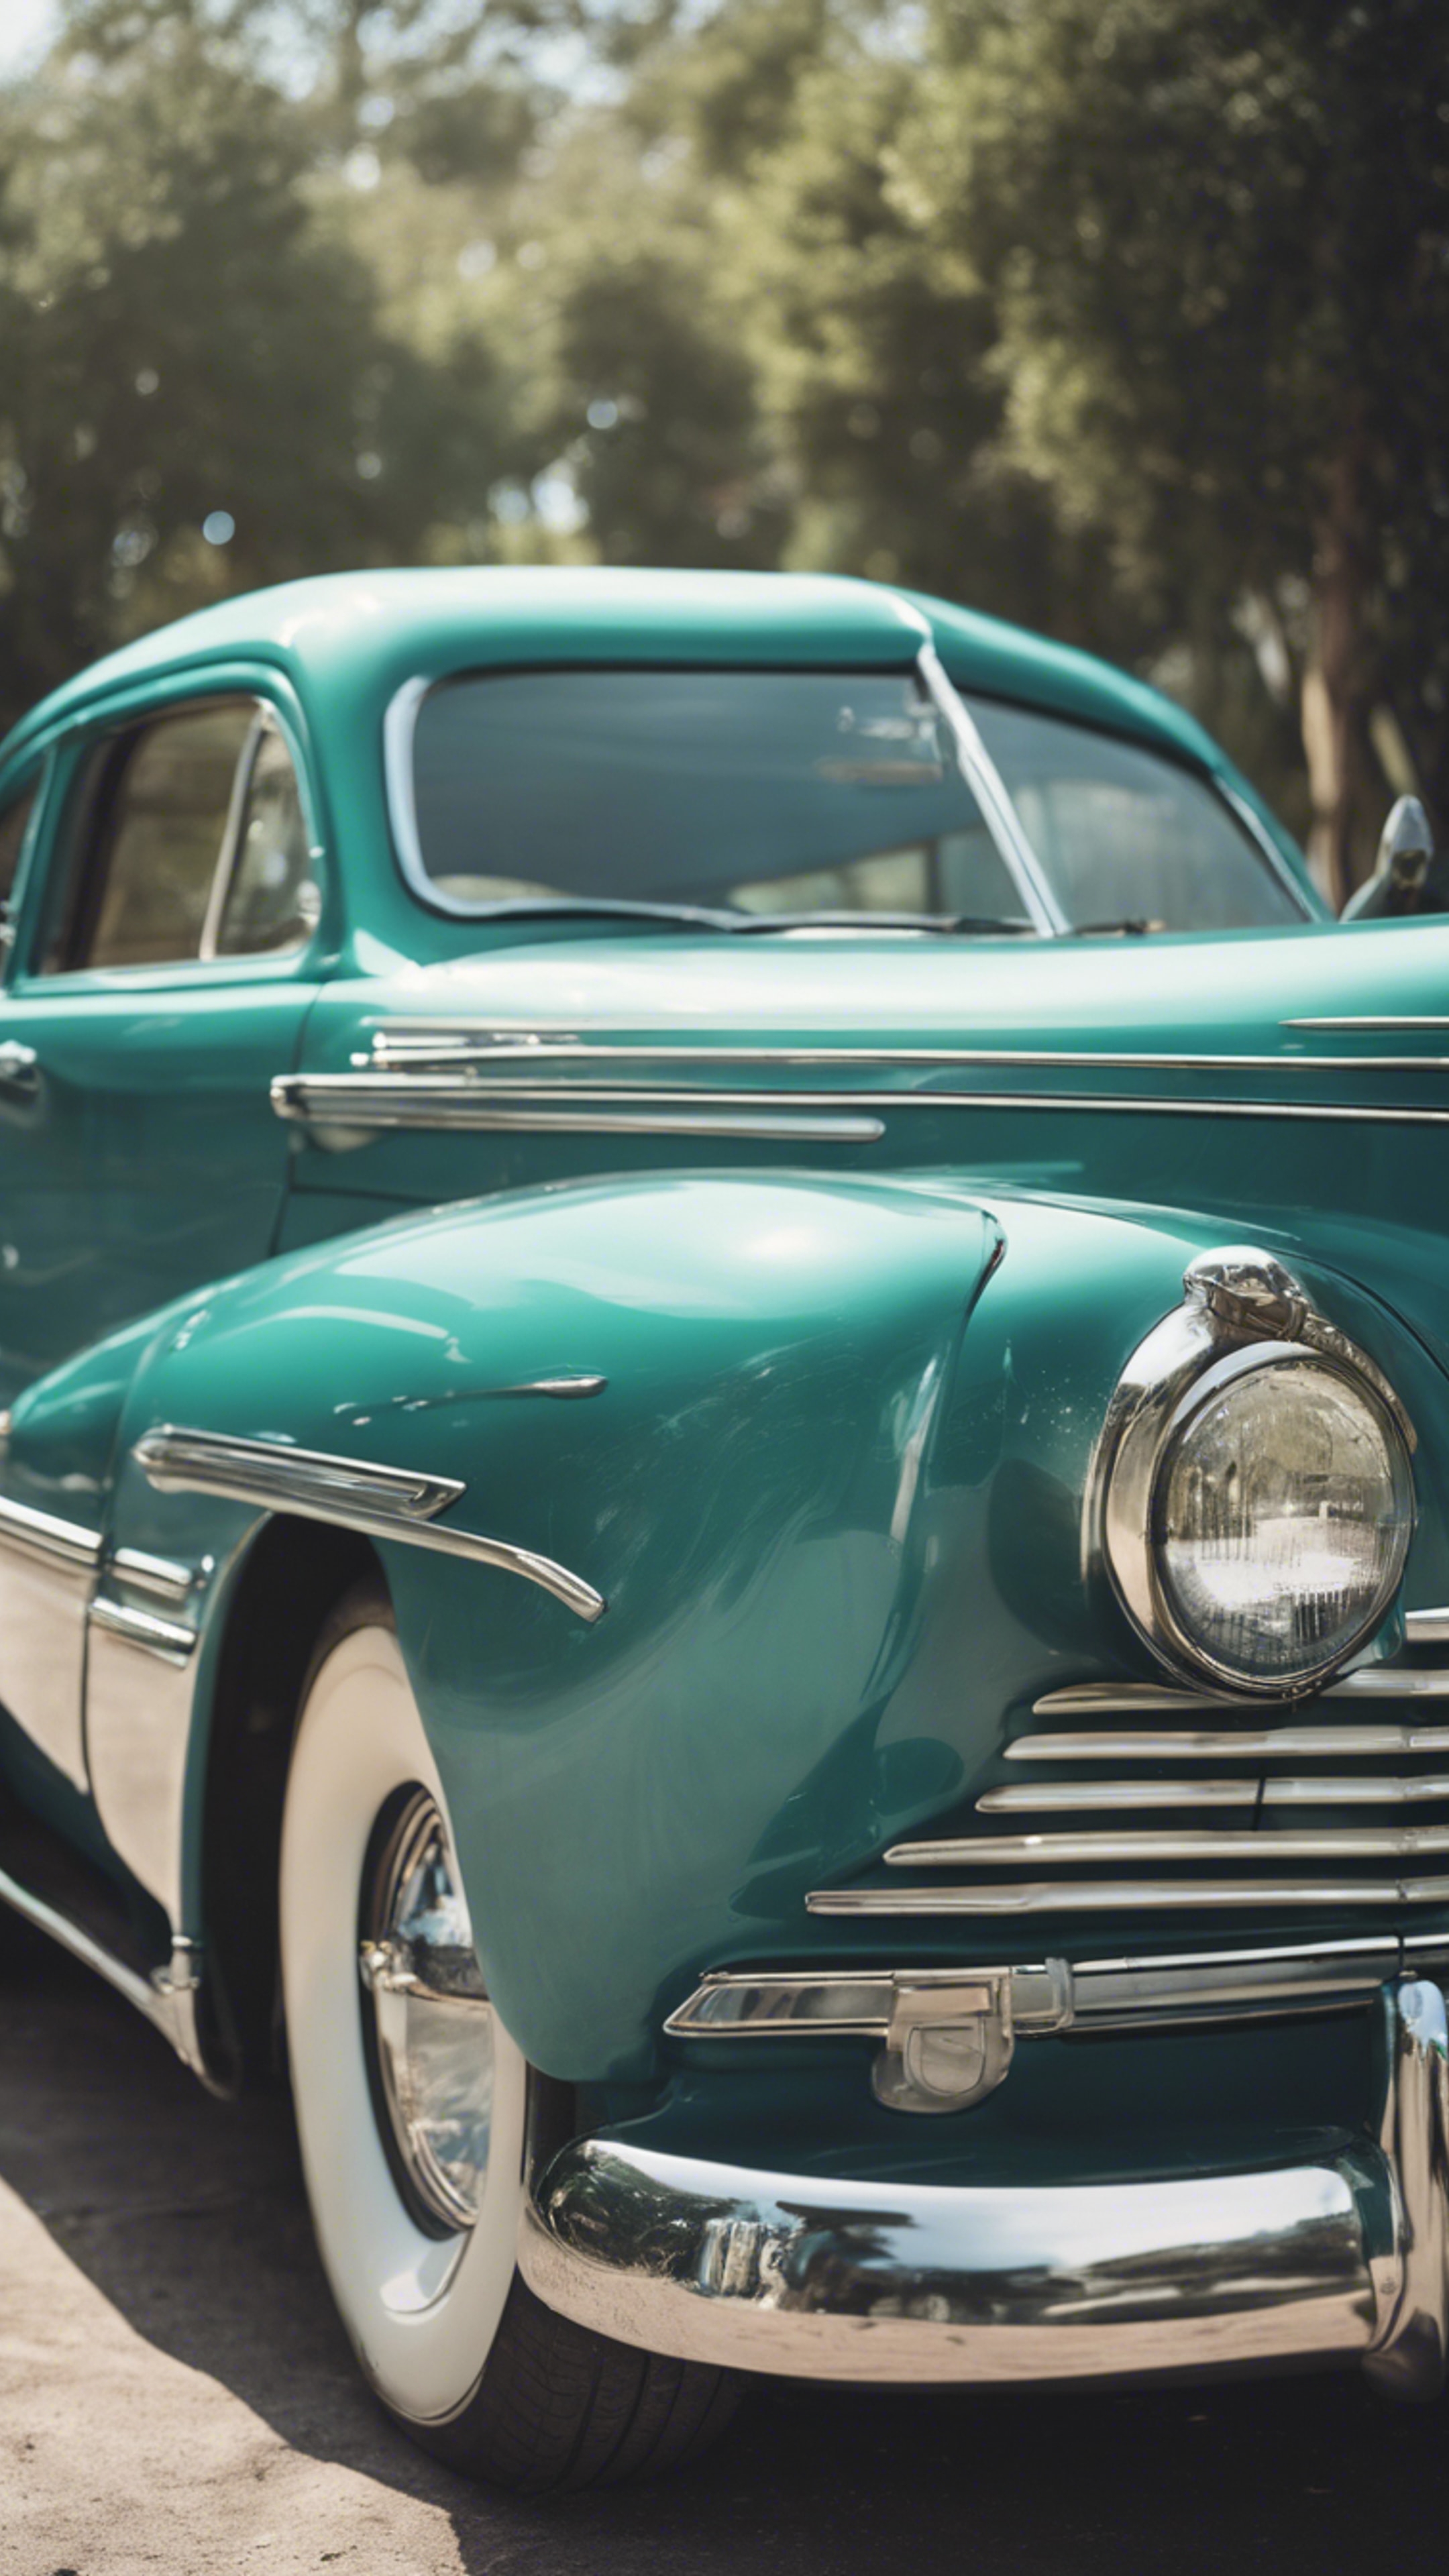 A vintage automobile polished in a cool teal color.壁紙[a65c55f132fb459cb8fd]